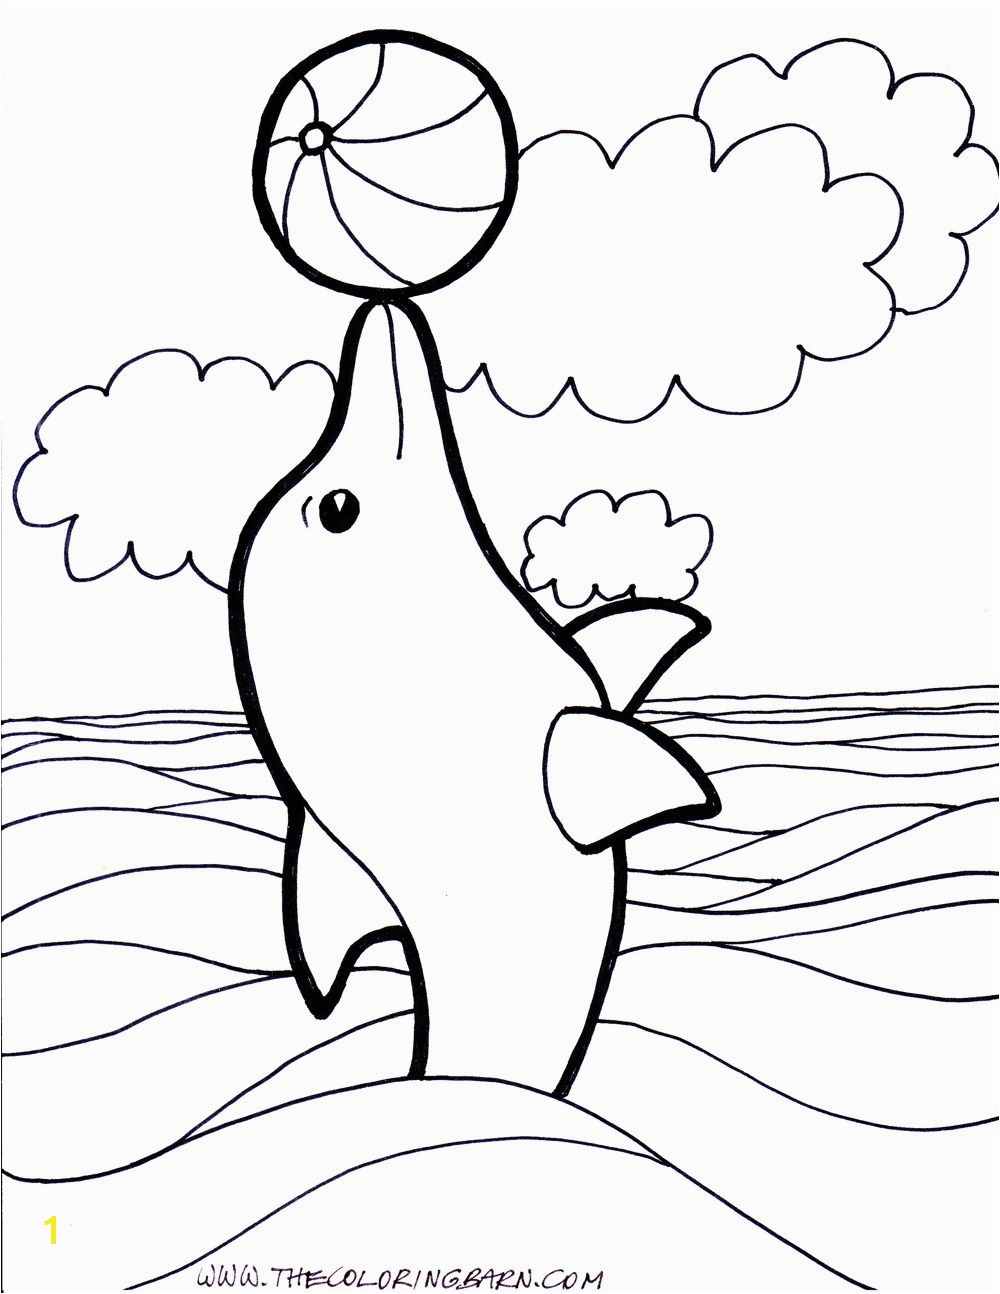 Coloring Pages Dolphins Dolphin Coloring Pages to Print Dolphins